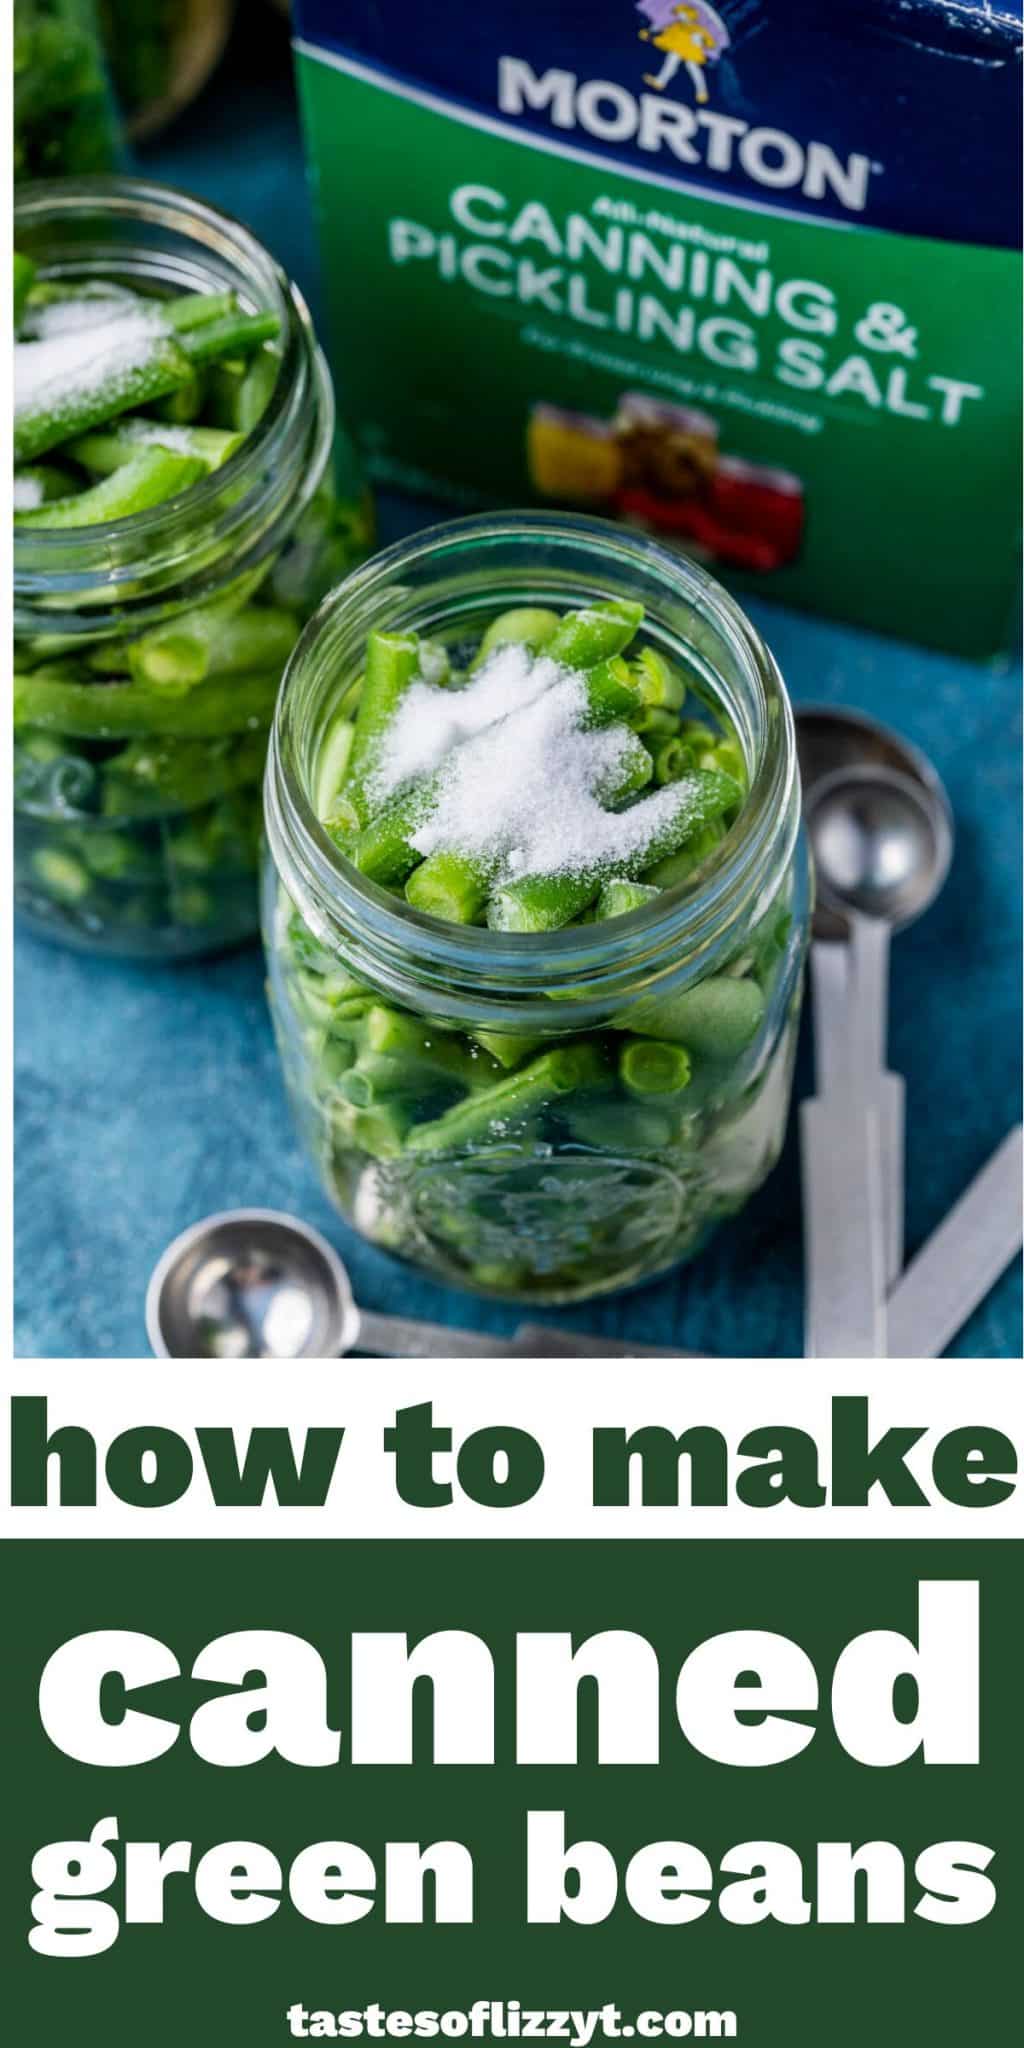 https://www.tastesoflizzyt.com/wp-content/uploads/2022/08/how-to-make-canned-green-beans-pin-scaled.jpg